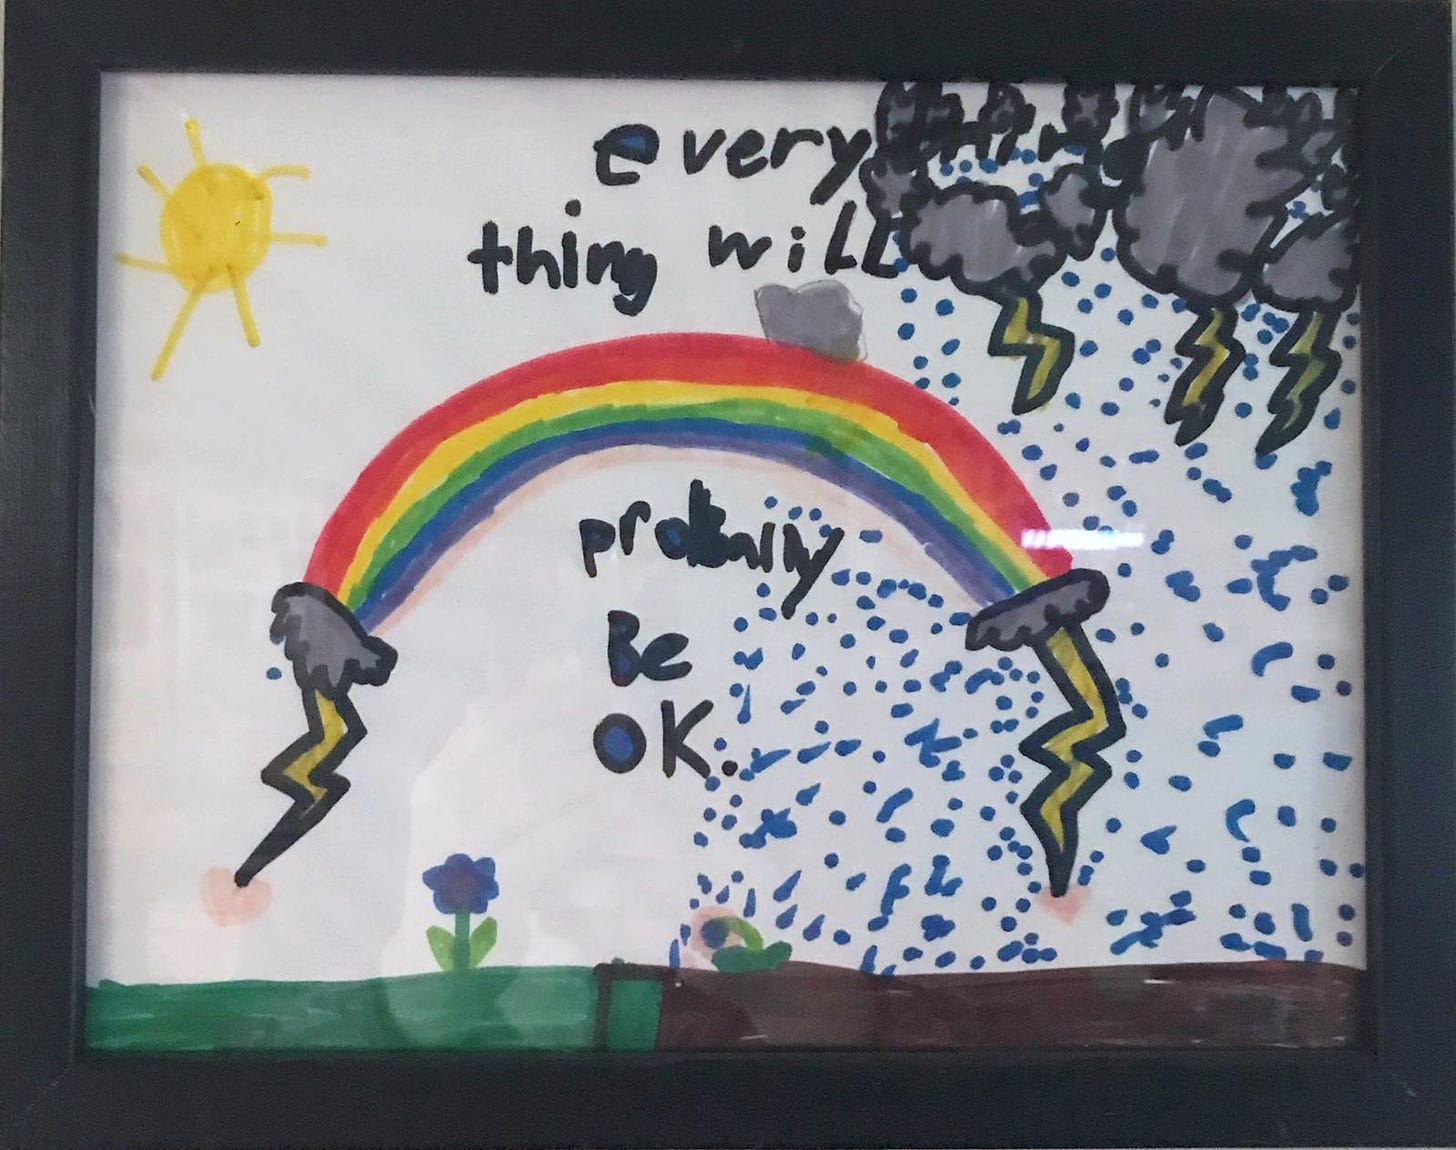 Child's drawing of a rainbow straddling sunshine and storm weather, with caption "everything will probally be ok"